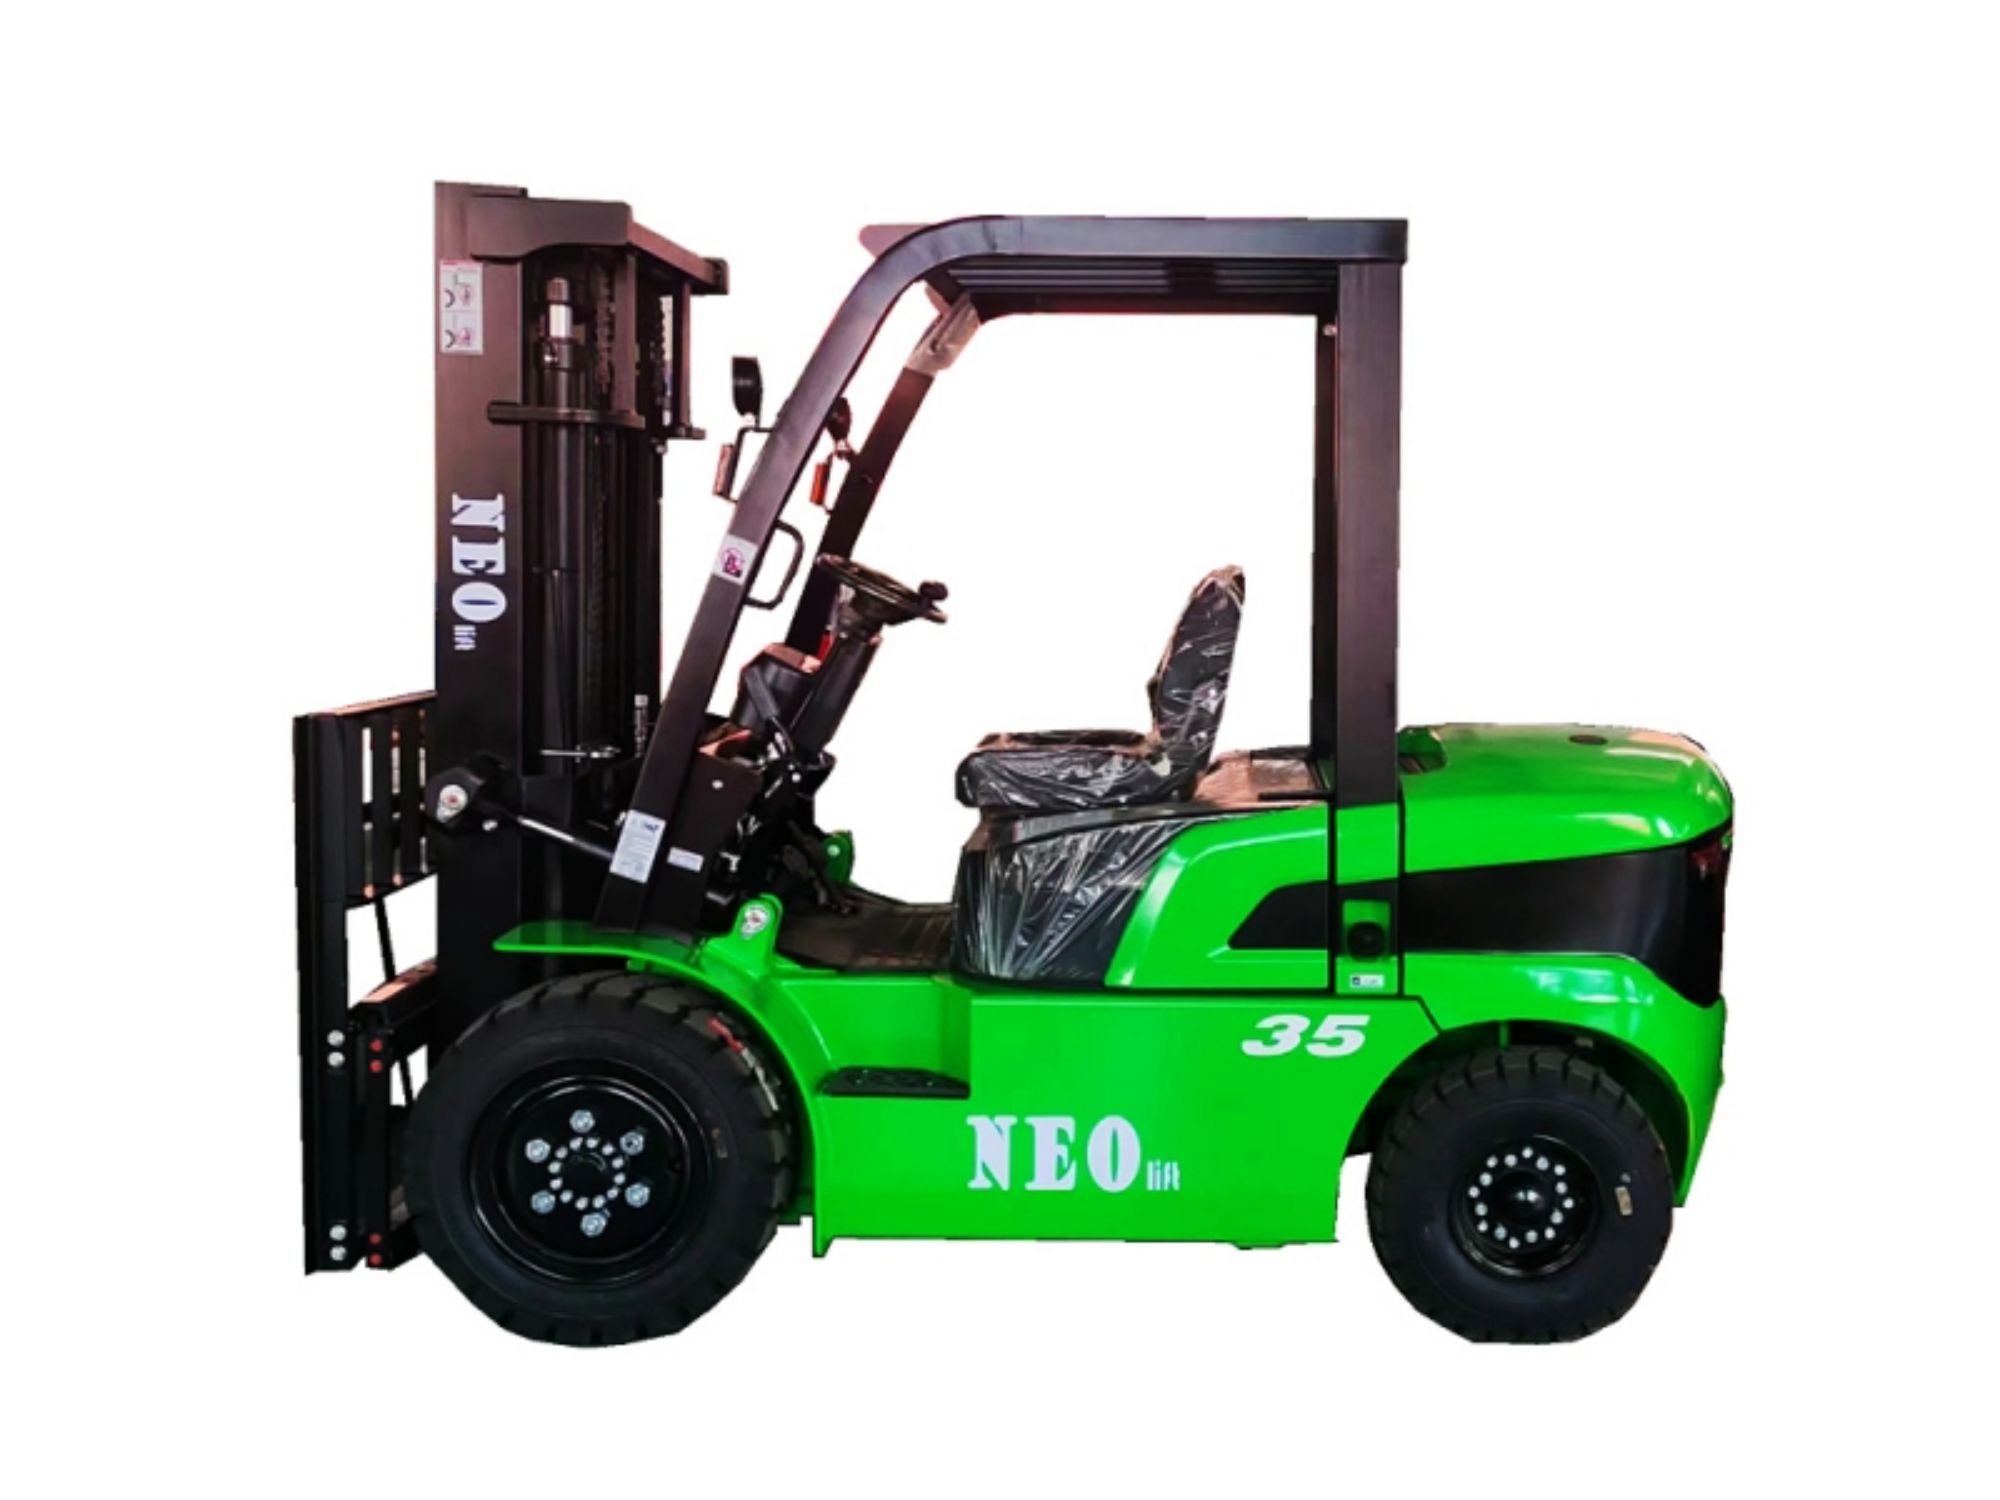 What is the development prospect of forklifts?